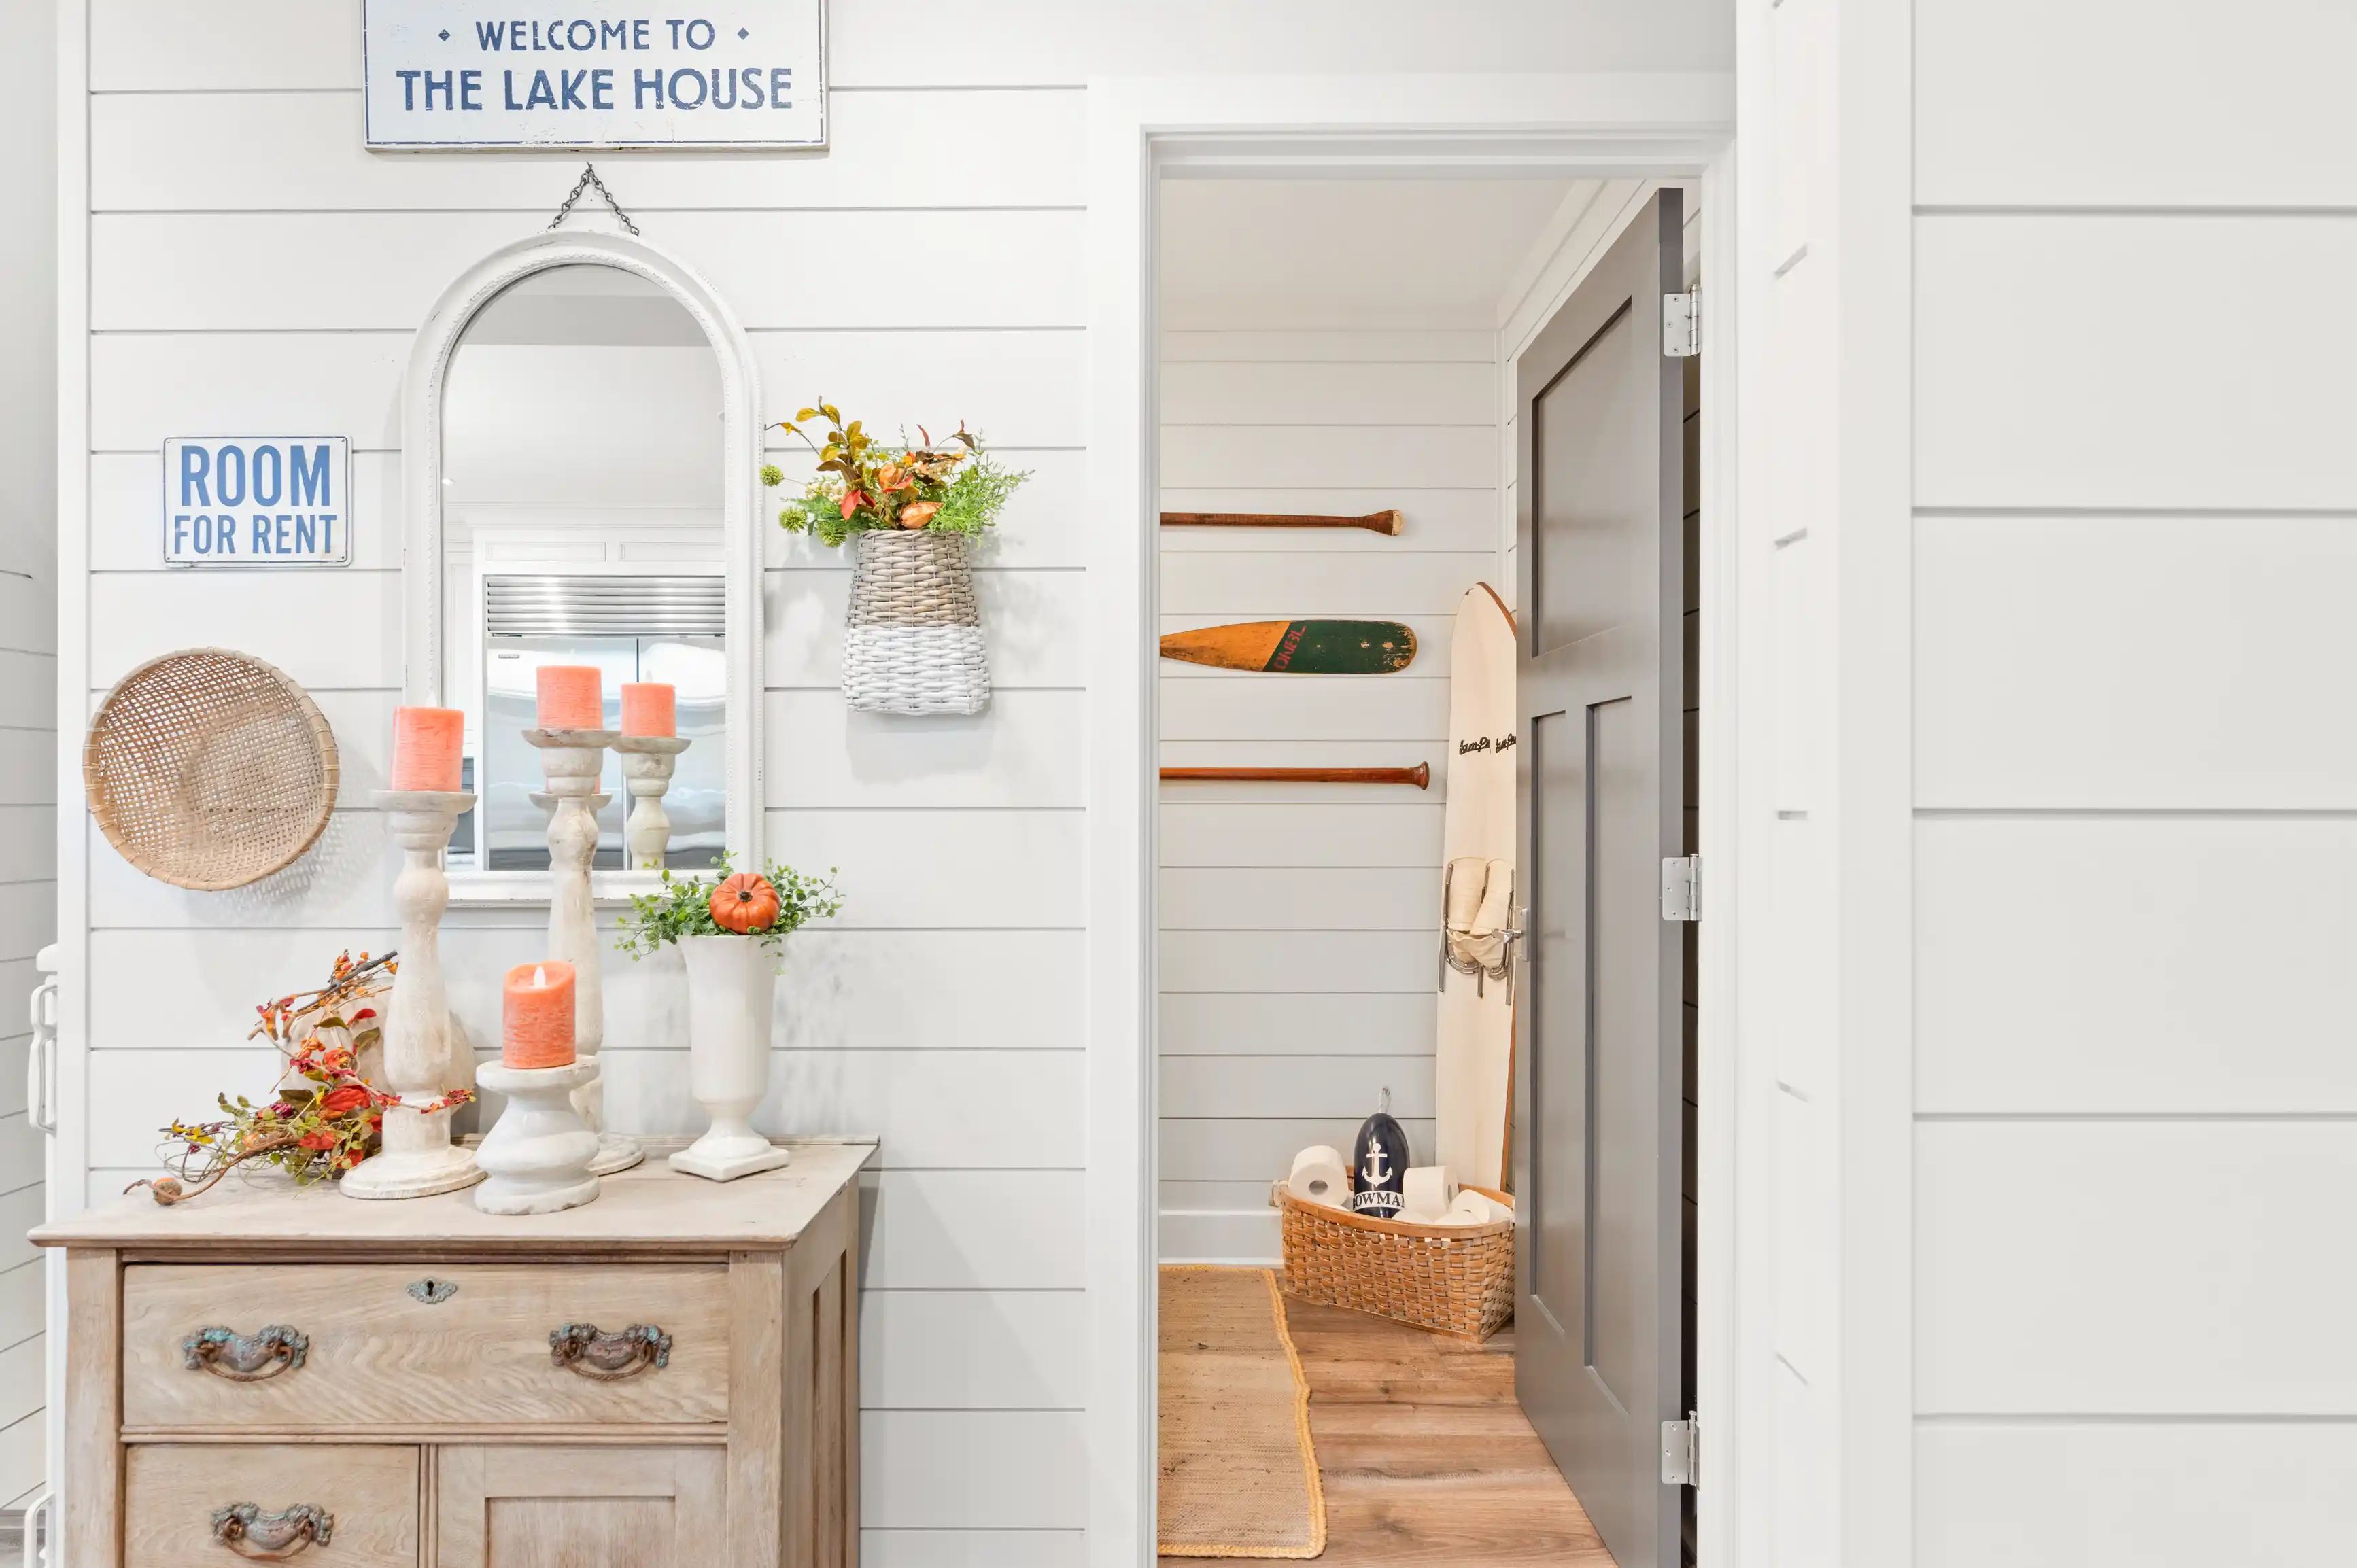 Cozy lake house entryway with a wooden dresser, mirror, decorative candles, wall-mounted oars, and a sign reading "Welcome to The Lake House".